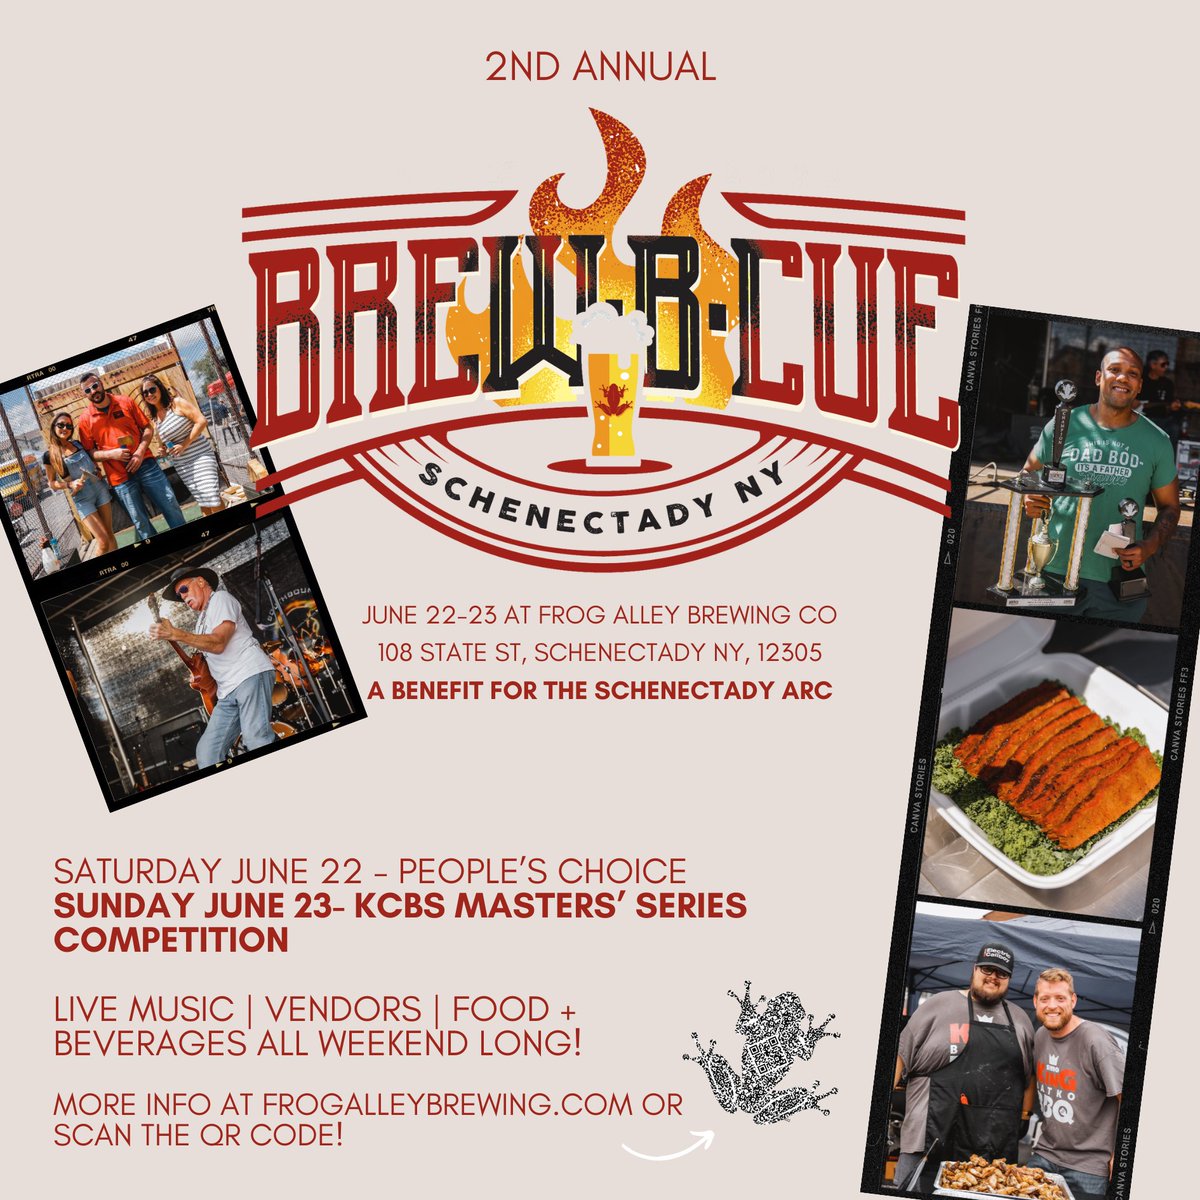 The countdown is on! The 2nd Annual Frog Alley Brew-B-Cue Cookoff is coming back to Schenectady, NY on June 22-23🔥 You know you want to be there for all of it! Learn more and register your team at: frogalleybrewing.com/team-informati…